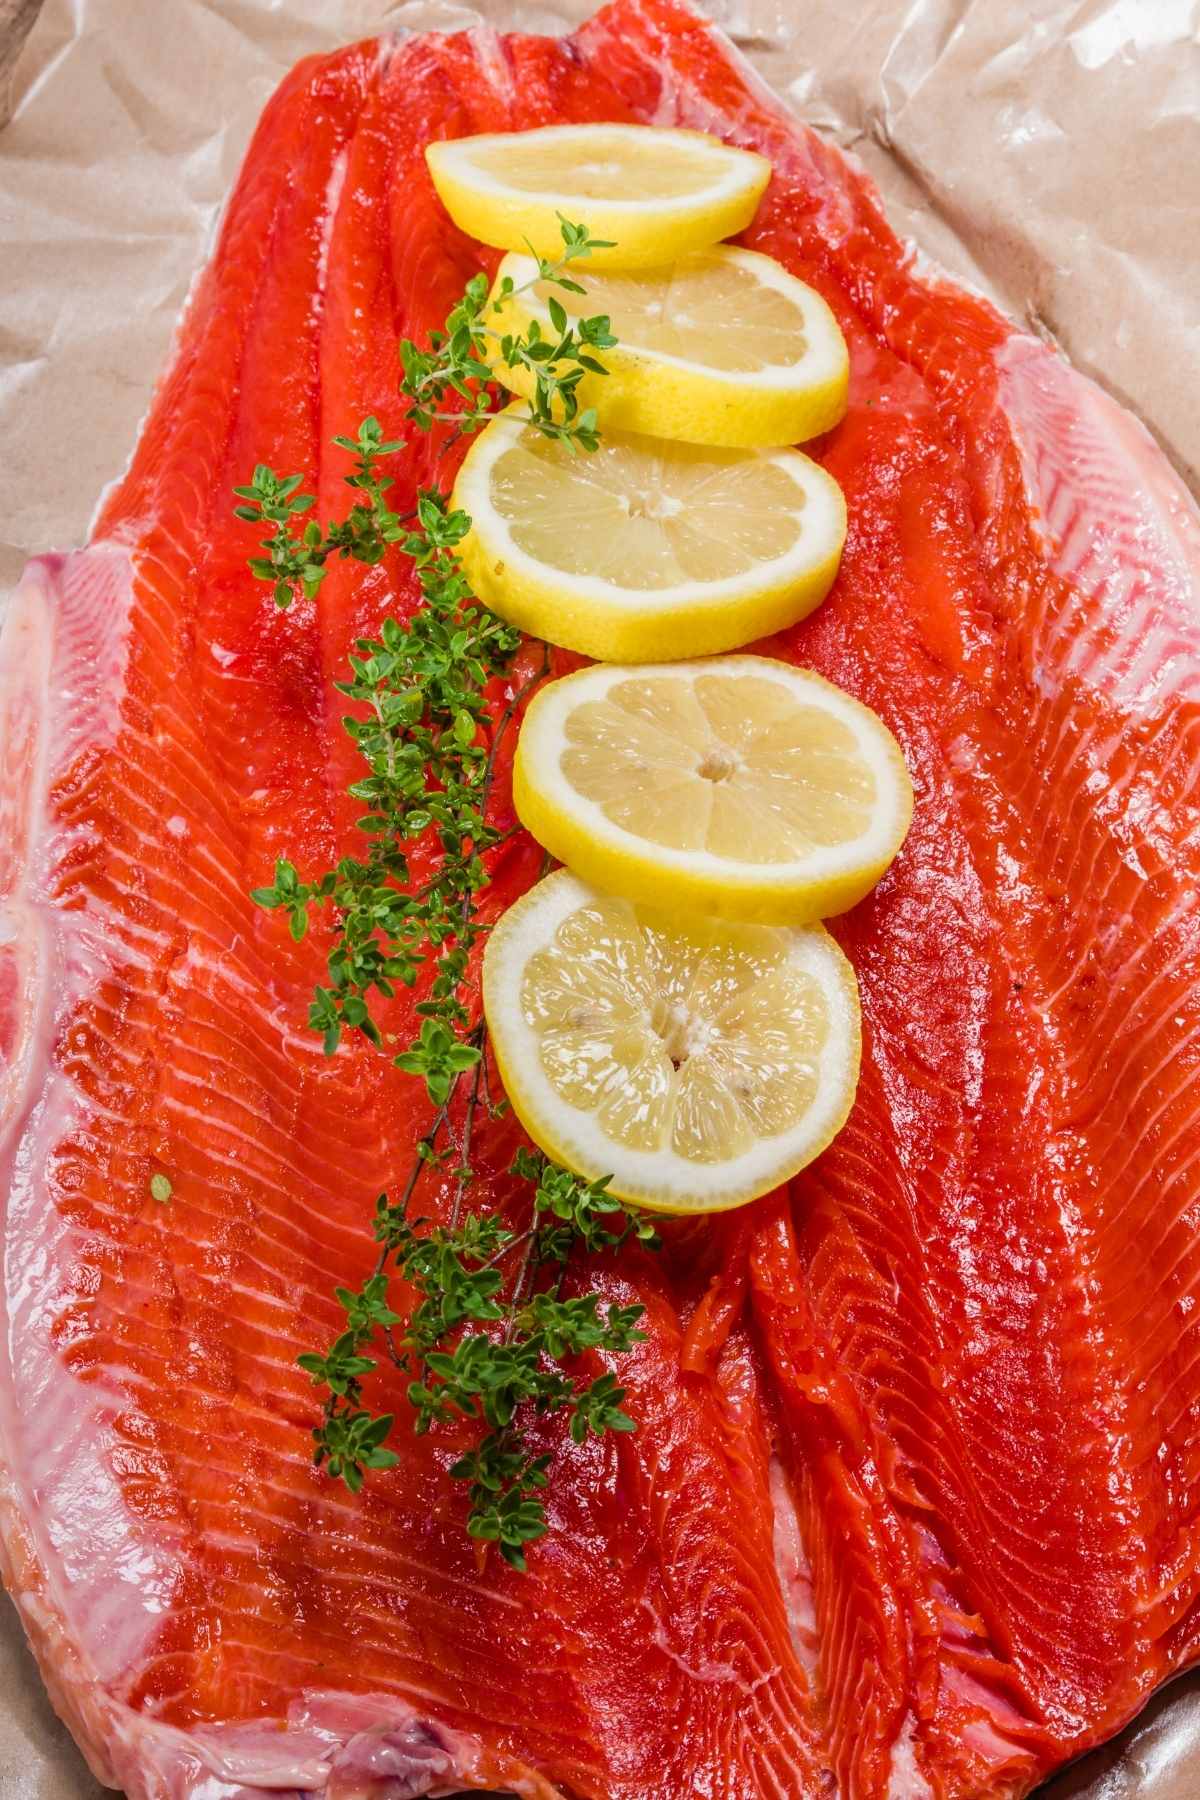 Baked Steelhead Trout filet is juicy and flavorful yet couldn’t be easier to make! Top it with shallots, garlic, lemon, and fresh herbs for an impressive meal. This versatile recipe also works well with salmon.